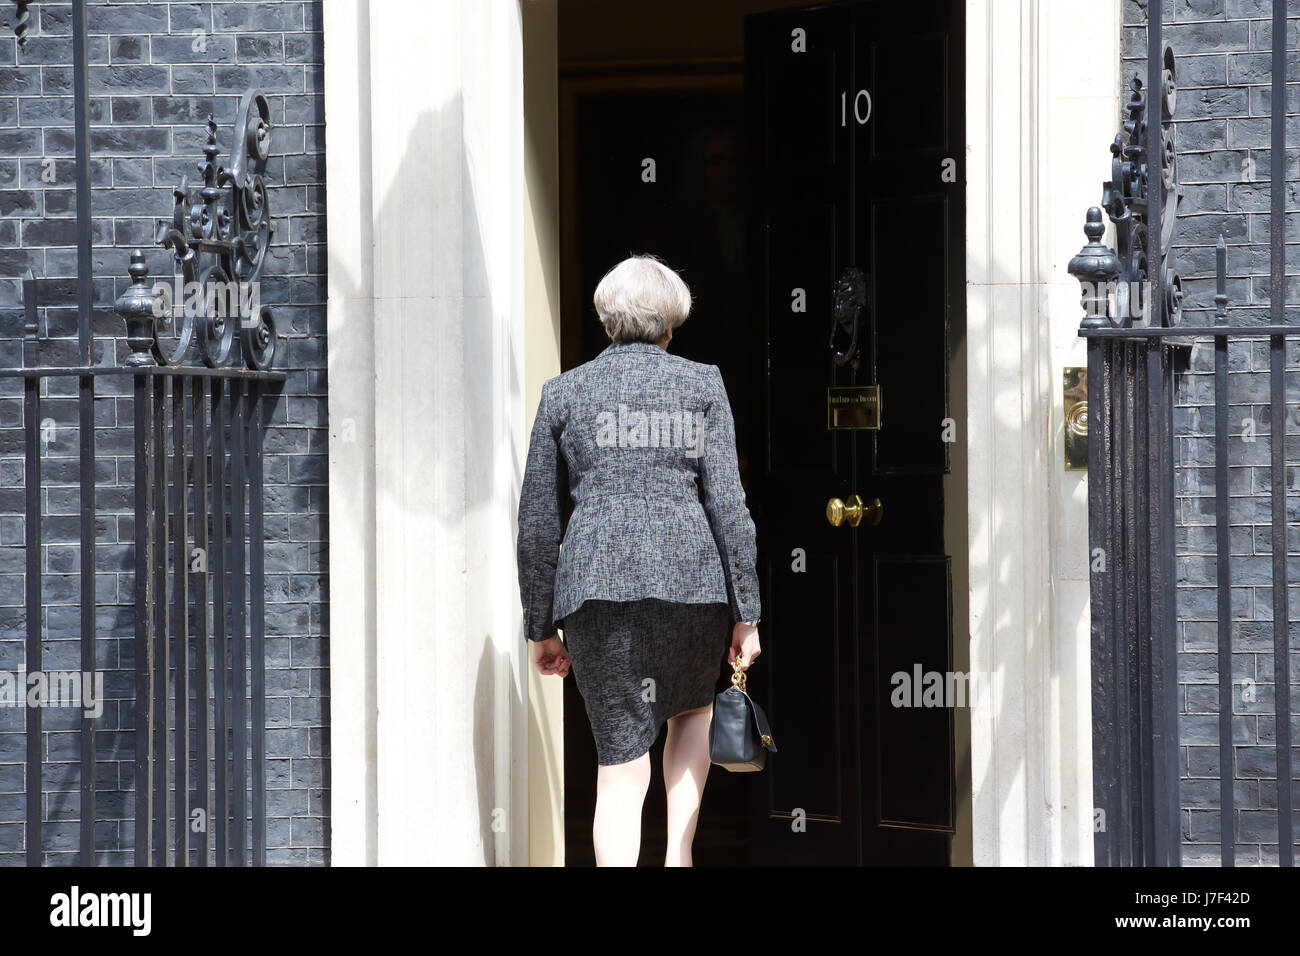 Brussels, Belgium. 25th May, 2017. Prime minister, Theresa May, arrives at Downing St in London before leaving to attend the NATO summit in Brussels.©Keith Larby/Alamy Live News Stock Photo